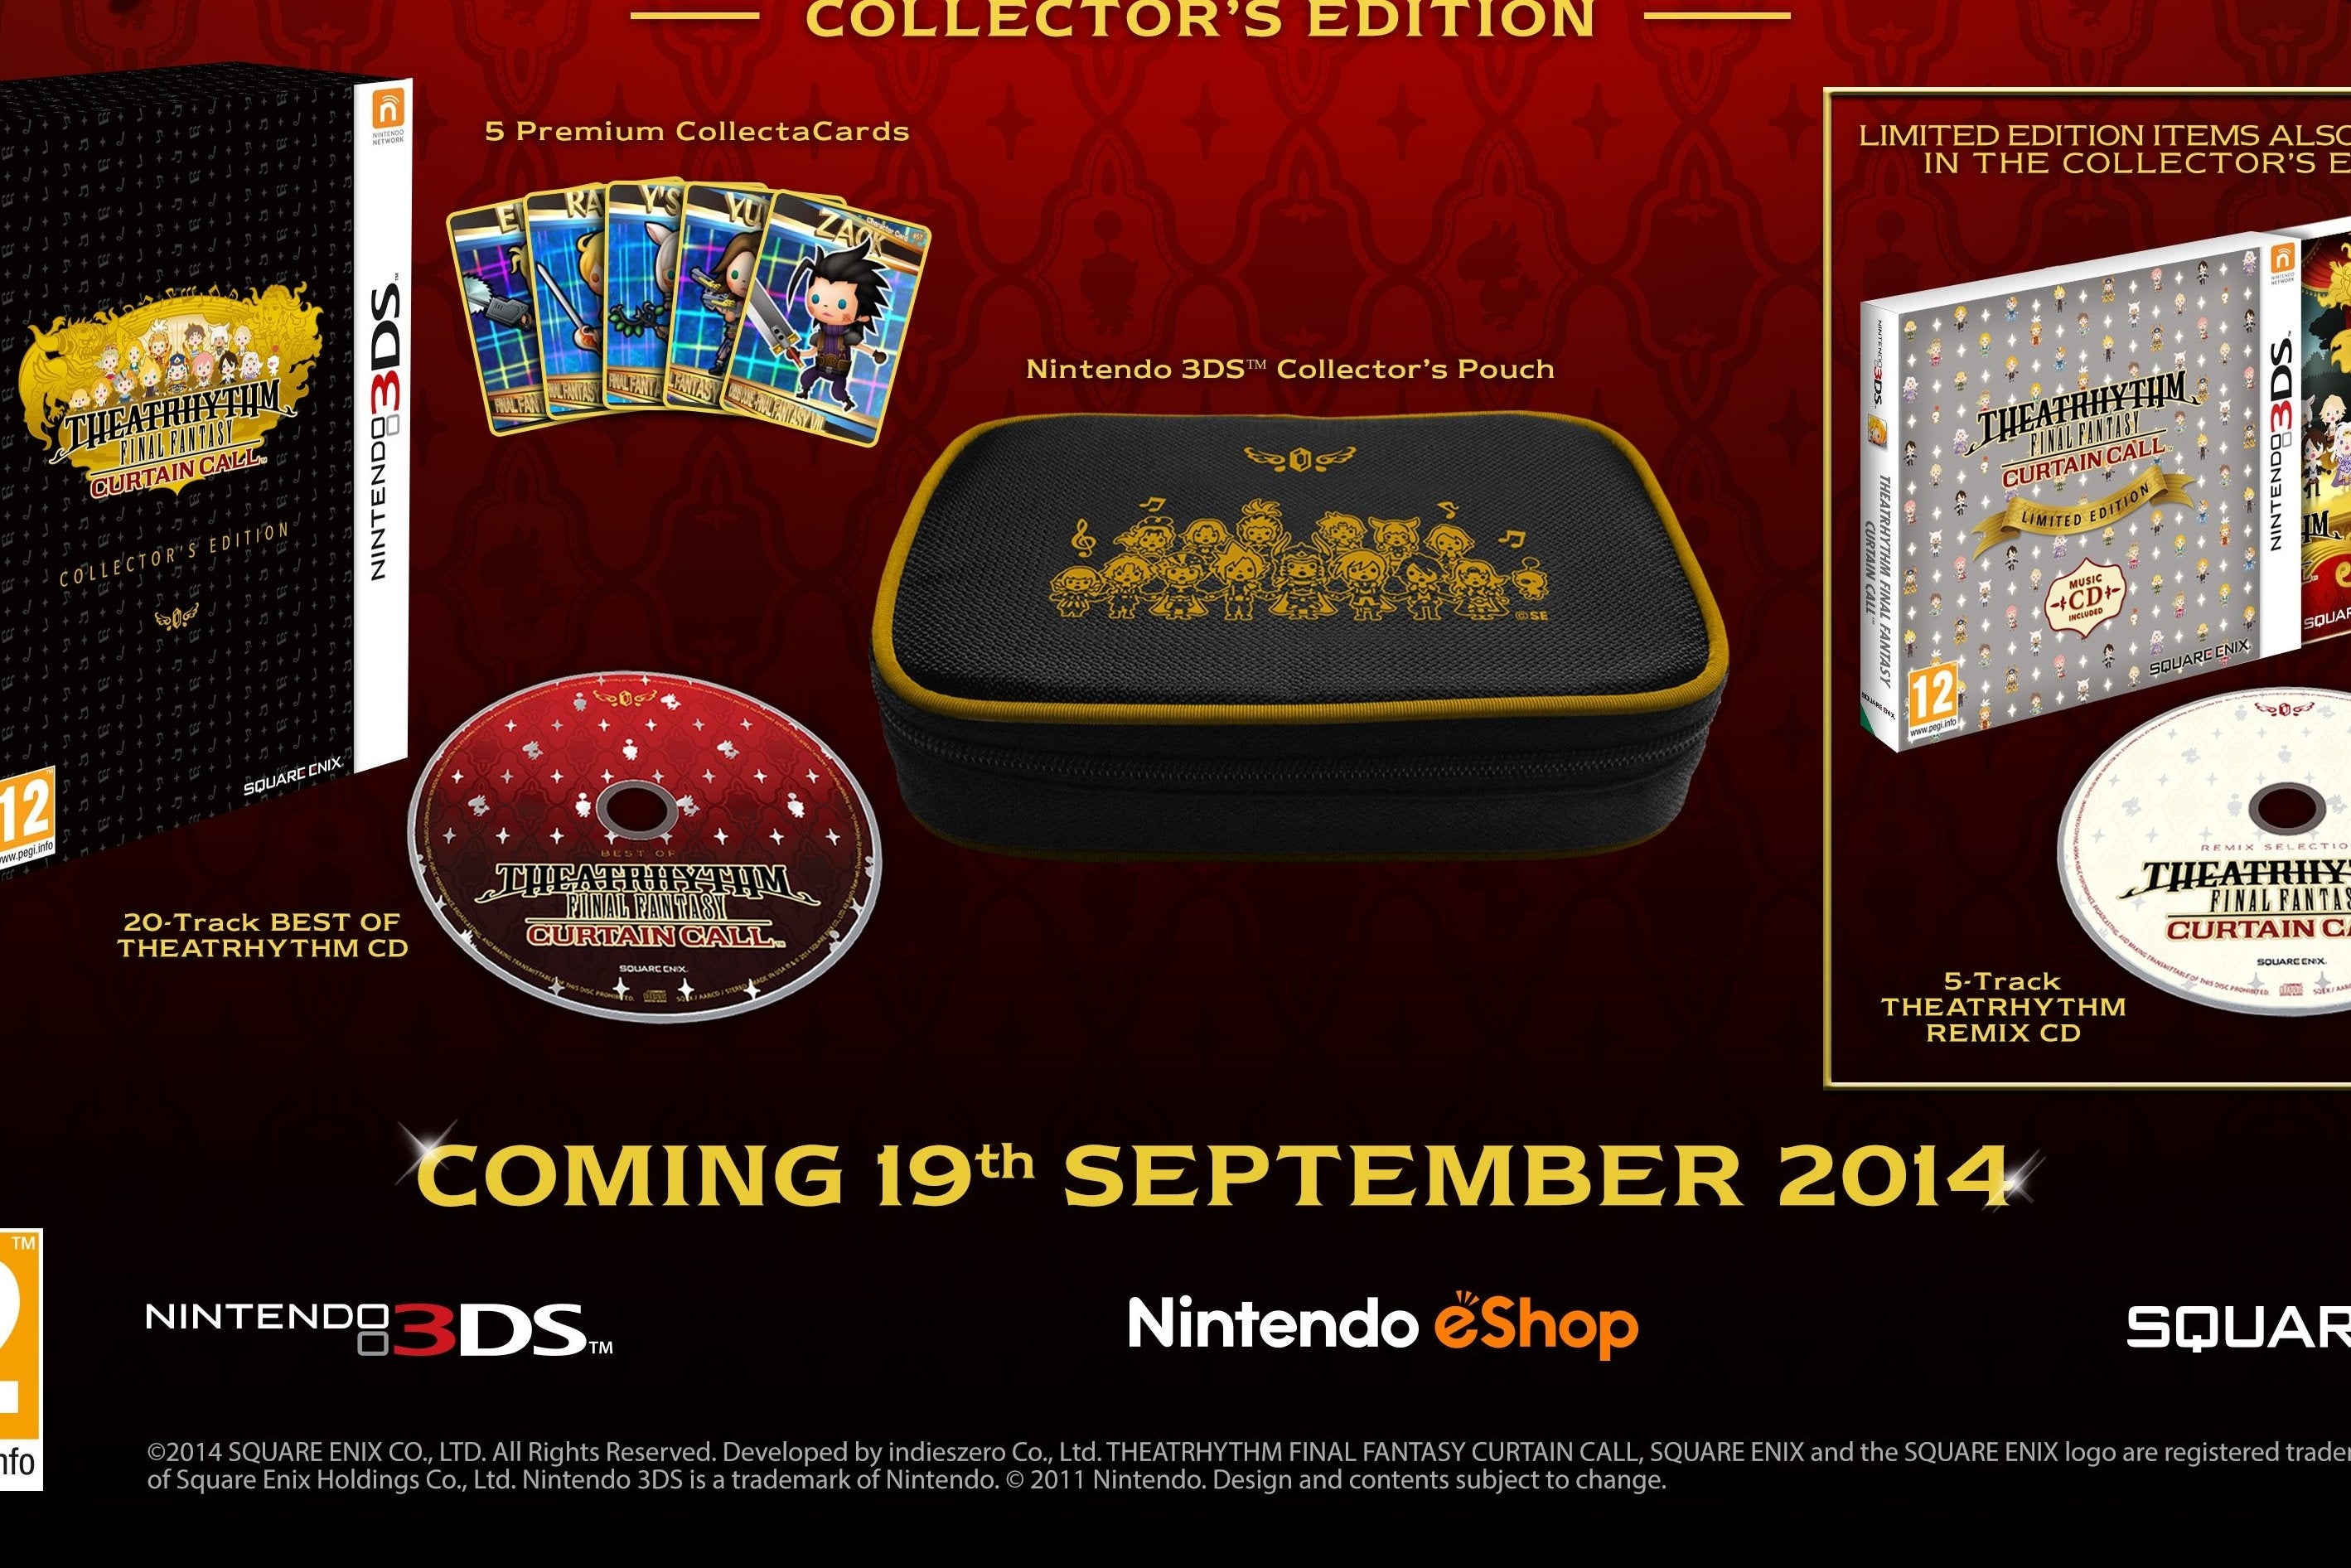 Image for Theatrhythm Final Fantasy Curtain Call release date announced